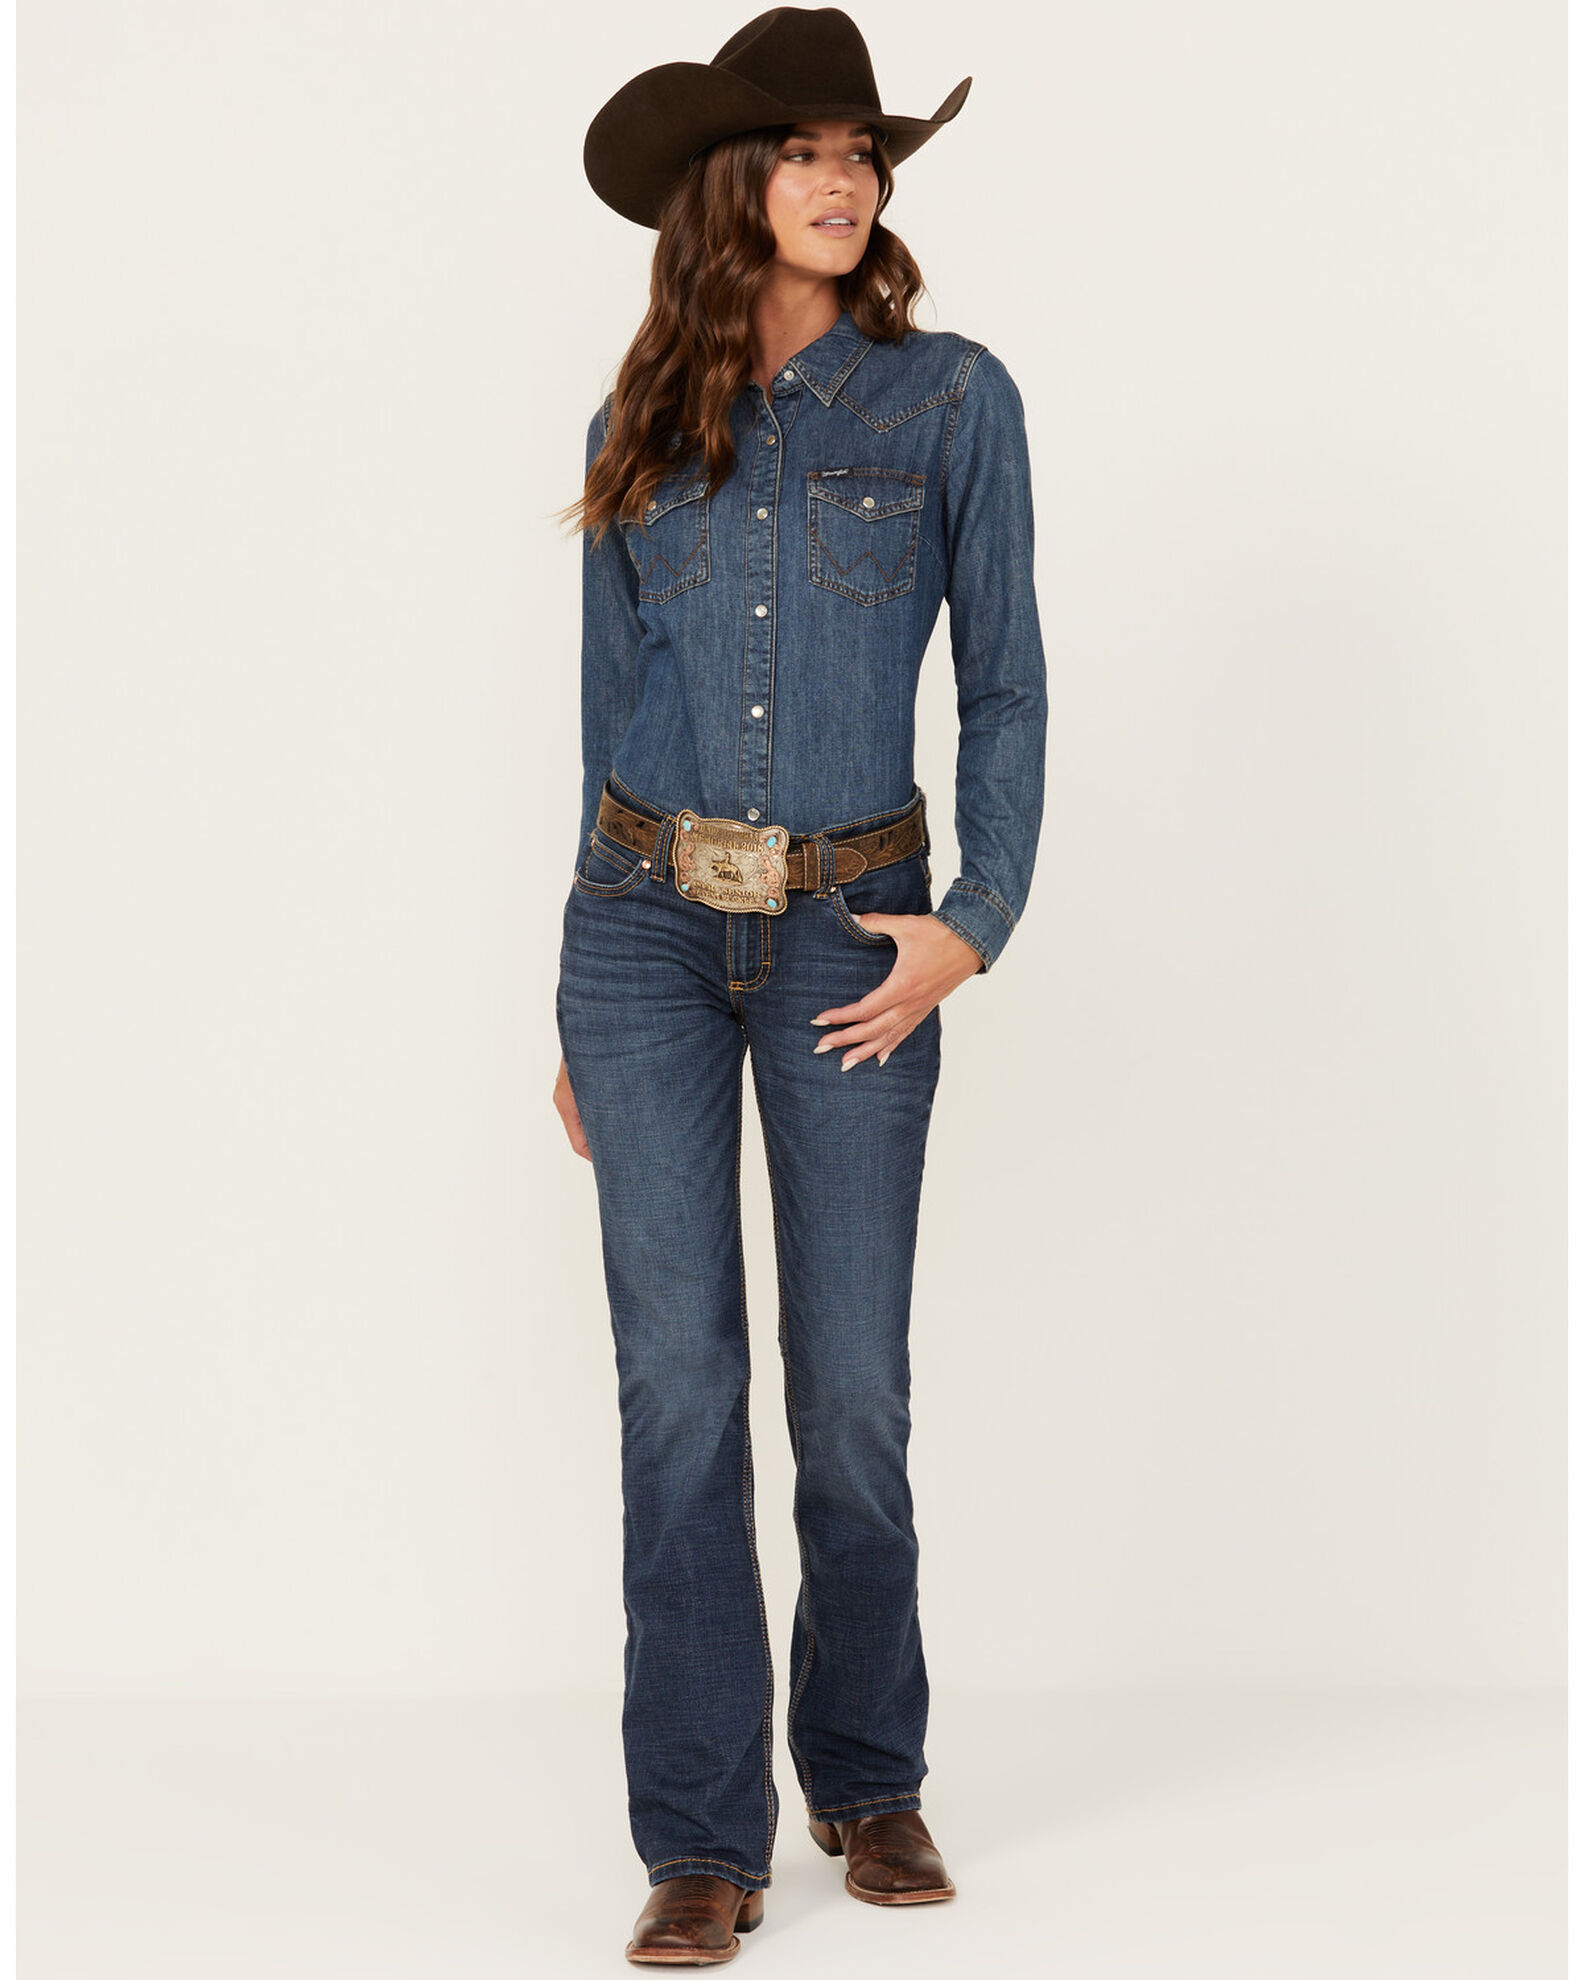 Wrangler Women's Medium Wash Retro Mae Jeans - Country Outfitter